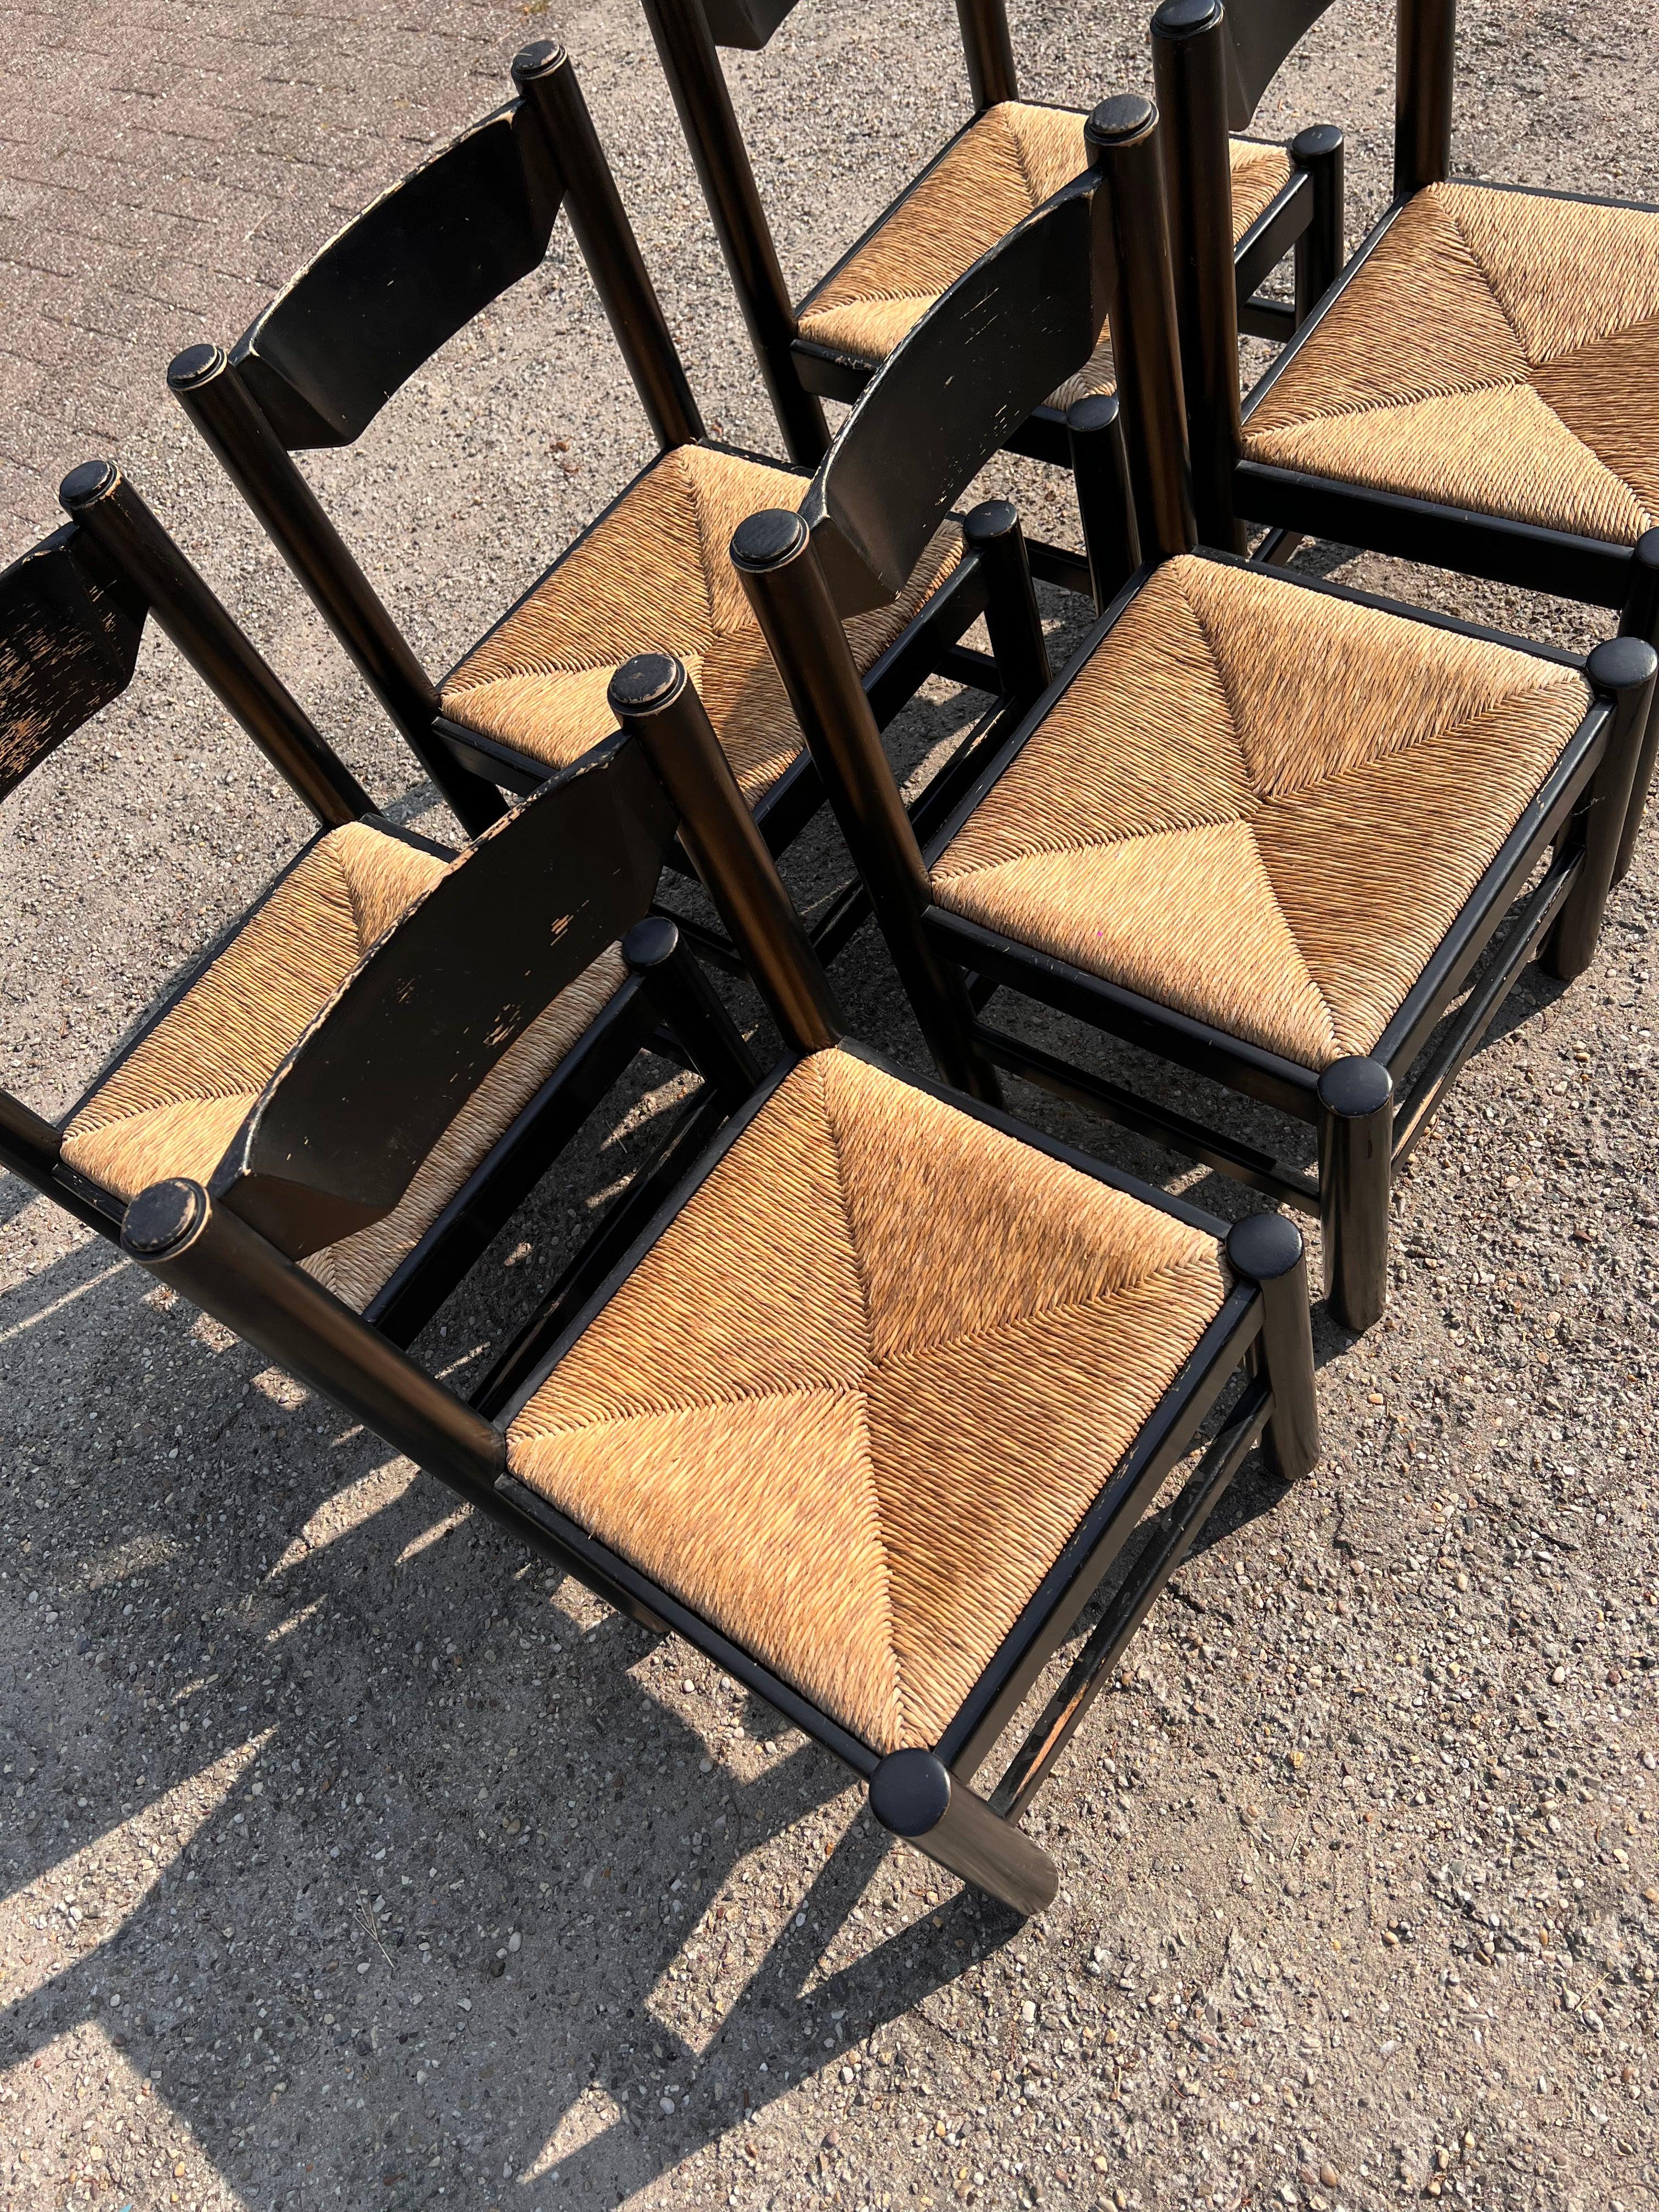 Set of 6 original Vico Magistretti dining chairs with lovely patina. The rush is in very good condition and there’s a matching table available if interested.